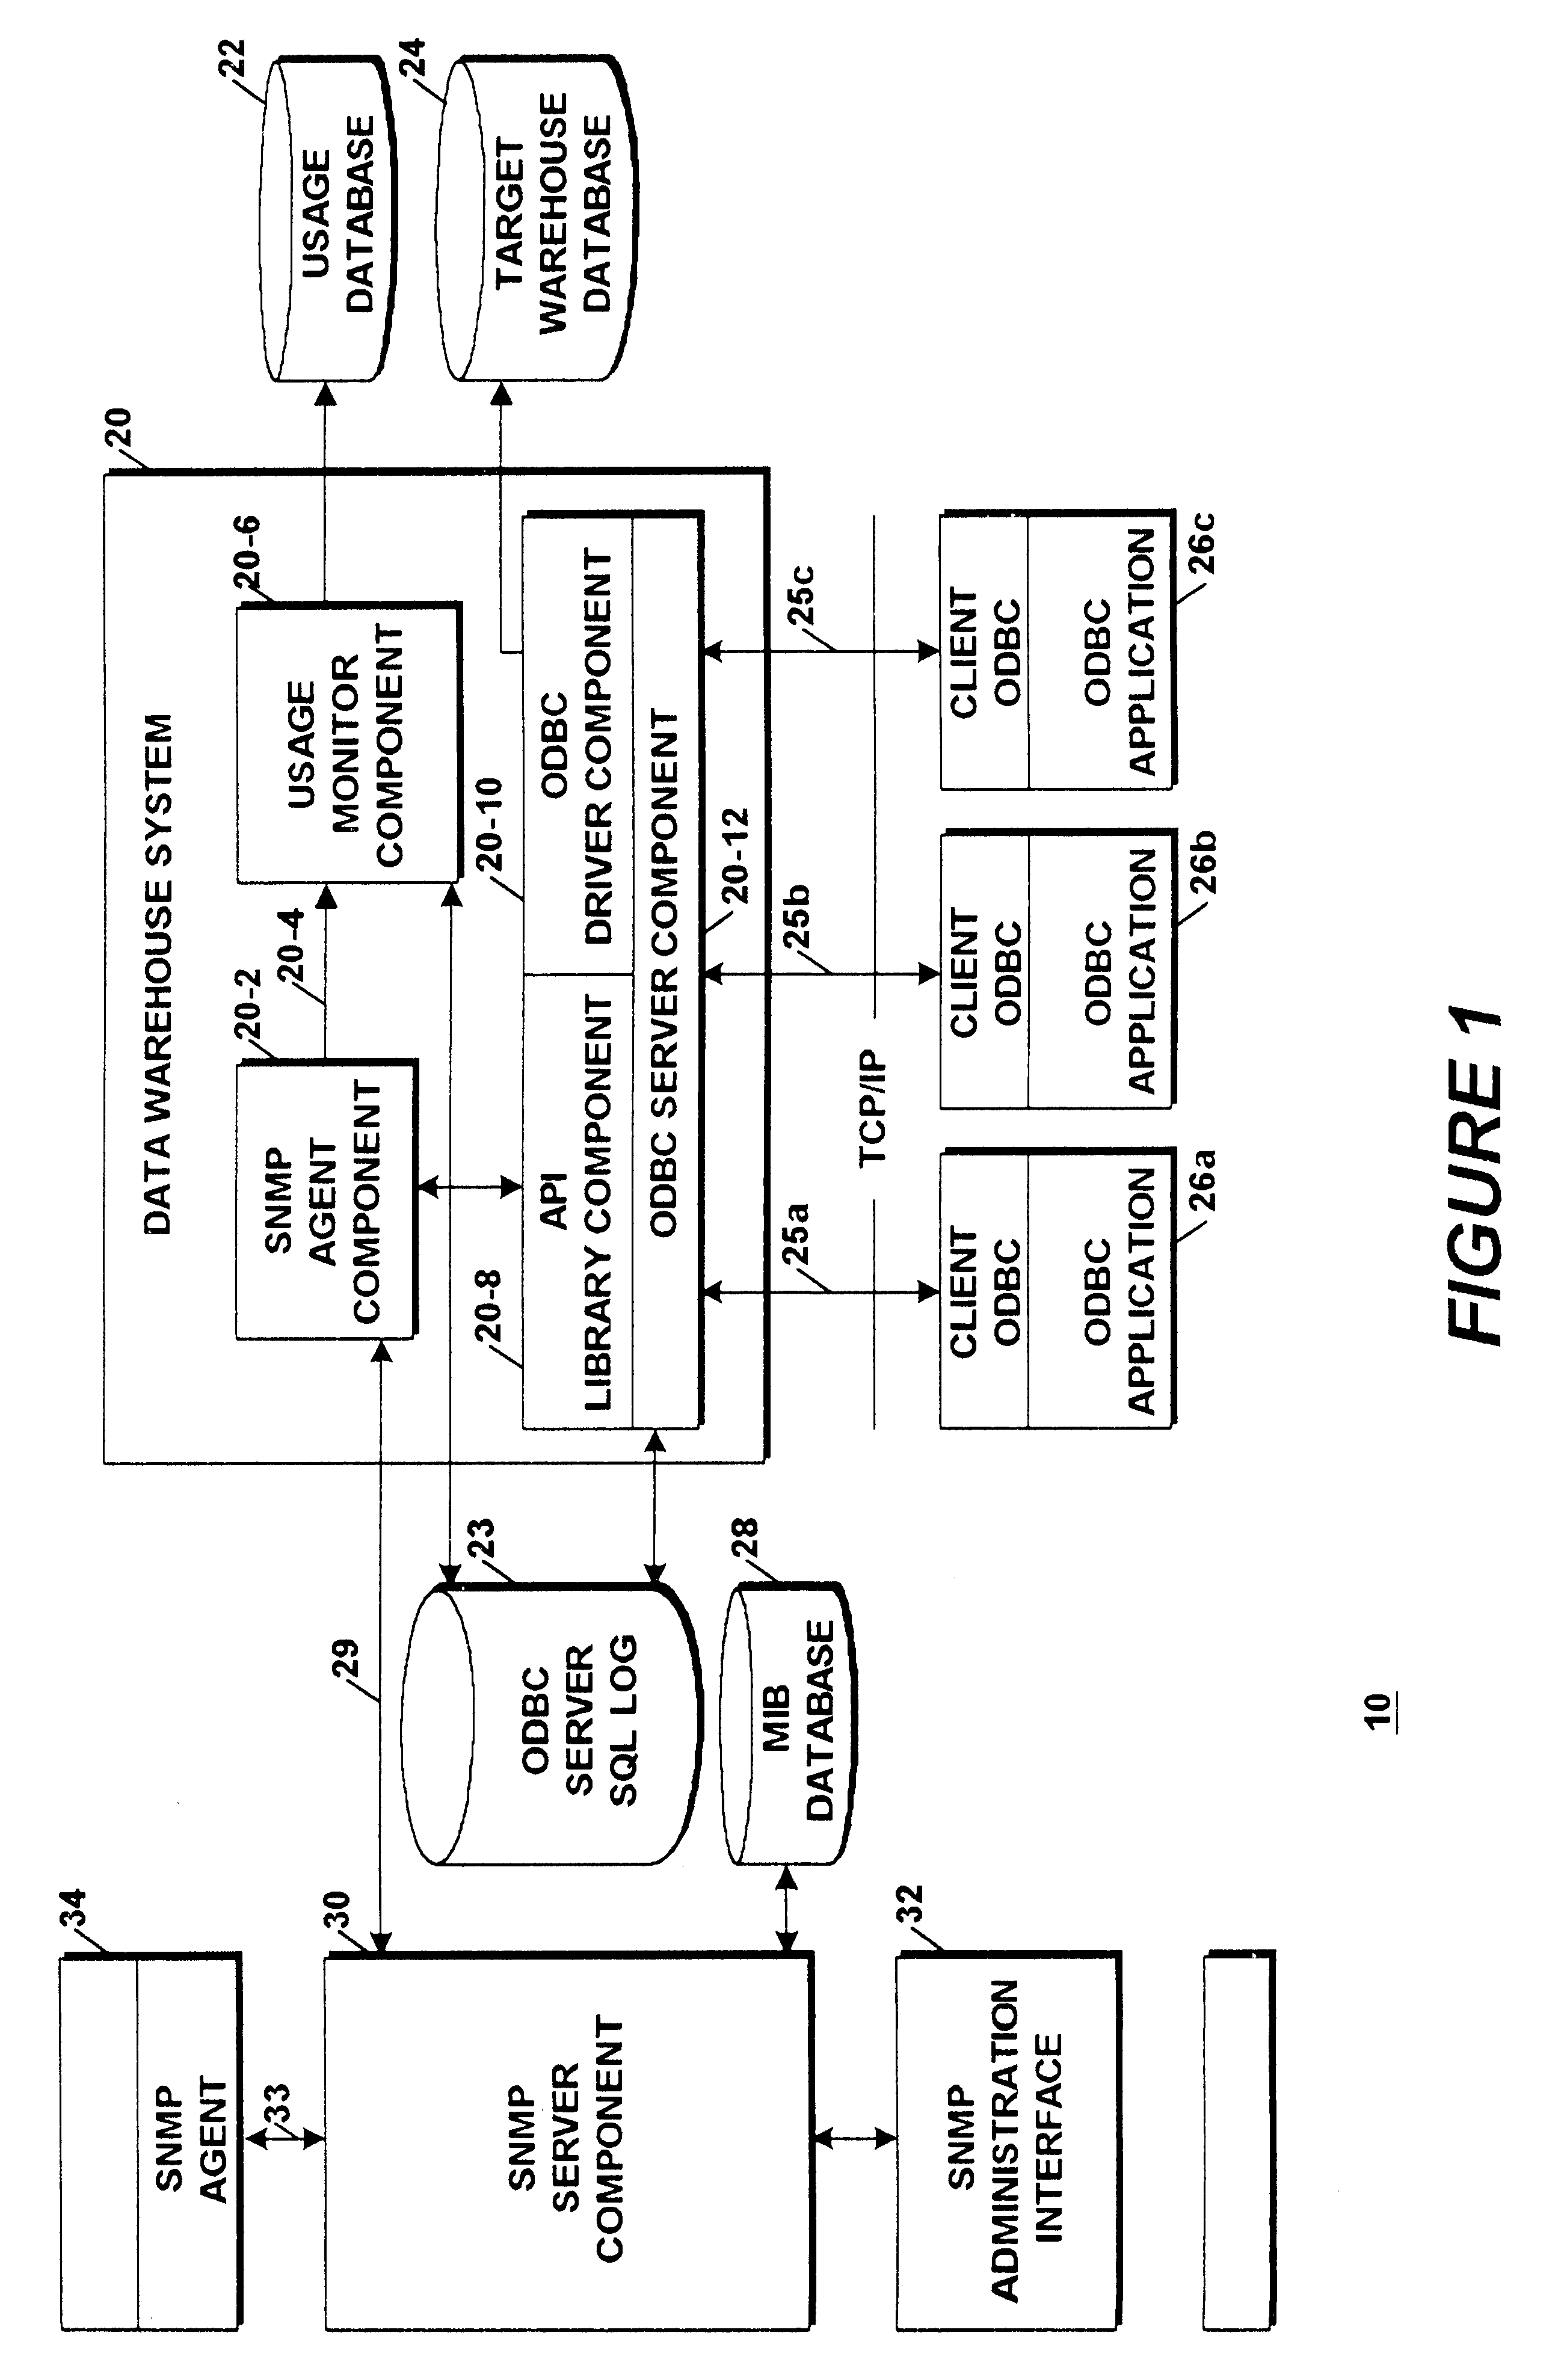 Application programming interface for monitoring data warehouse activity occurring through a client/server open database connectivity interface